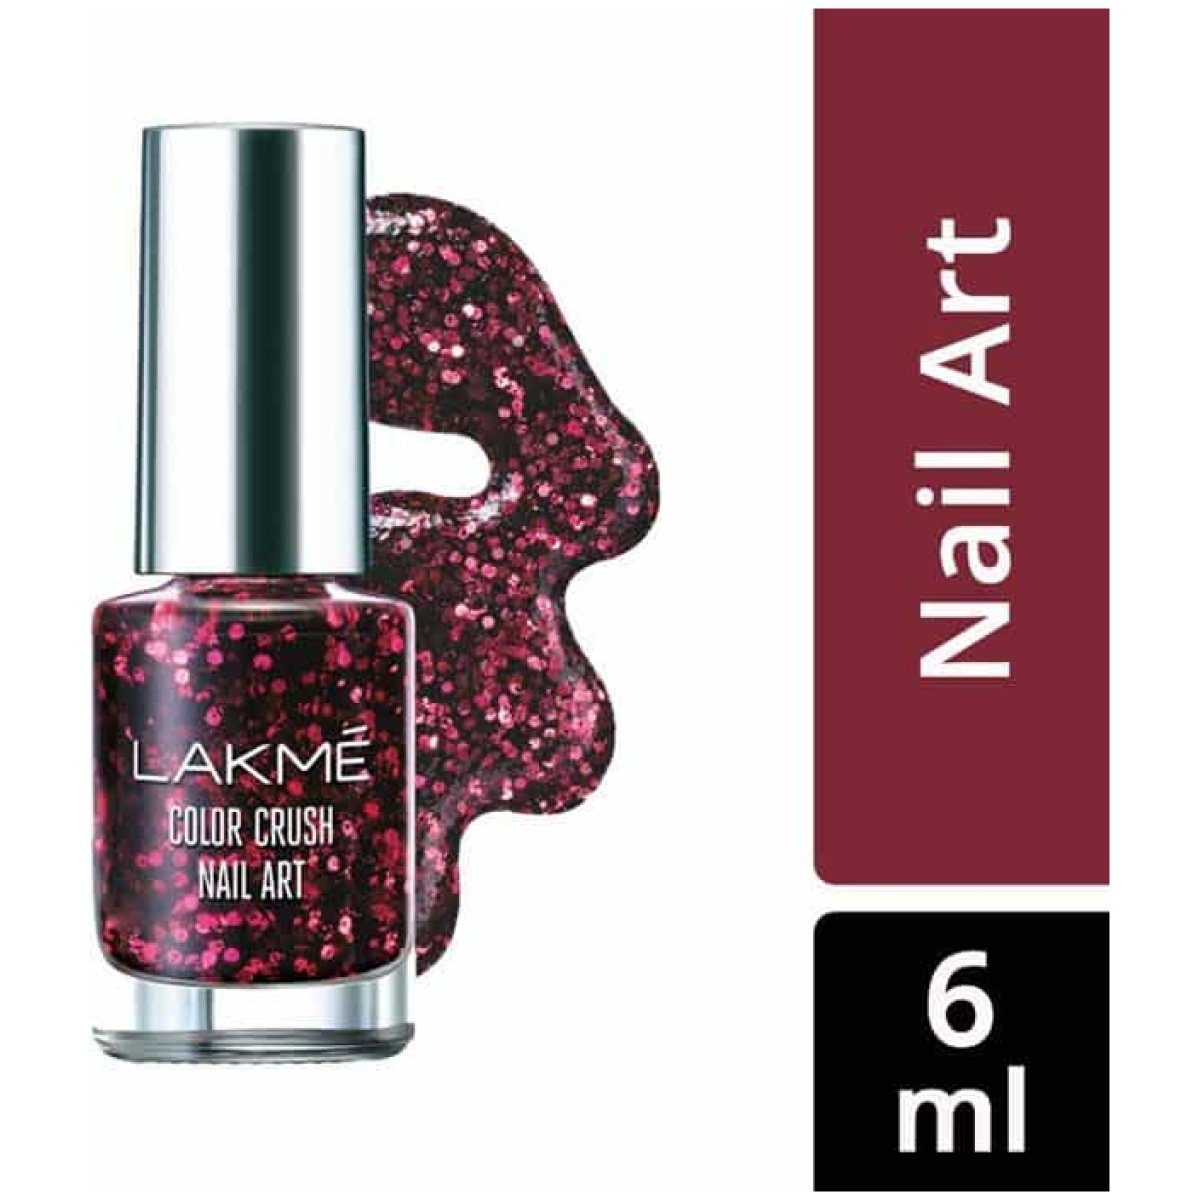 I Love Lakme - Add a calm blue tone to your weekend like  @pinks_and_pearls🦋​ ​ Style your nails with Color Crush Nail Art in shade  M16💎​ ​ 🛍Shop on https://lakmeindia.com/products/lakme-color-crush-nail- art ​ #lakme #